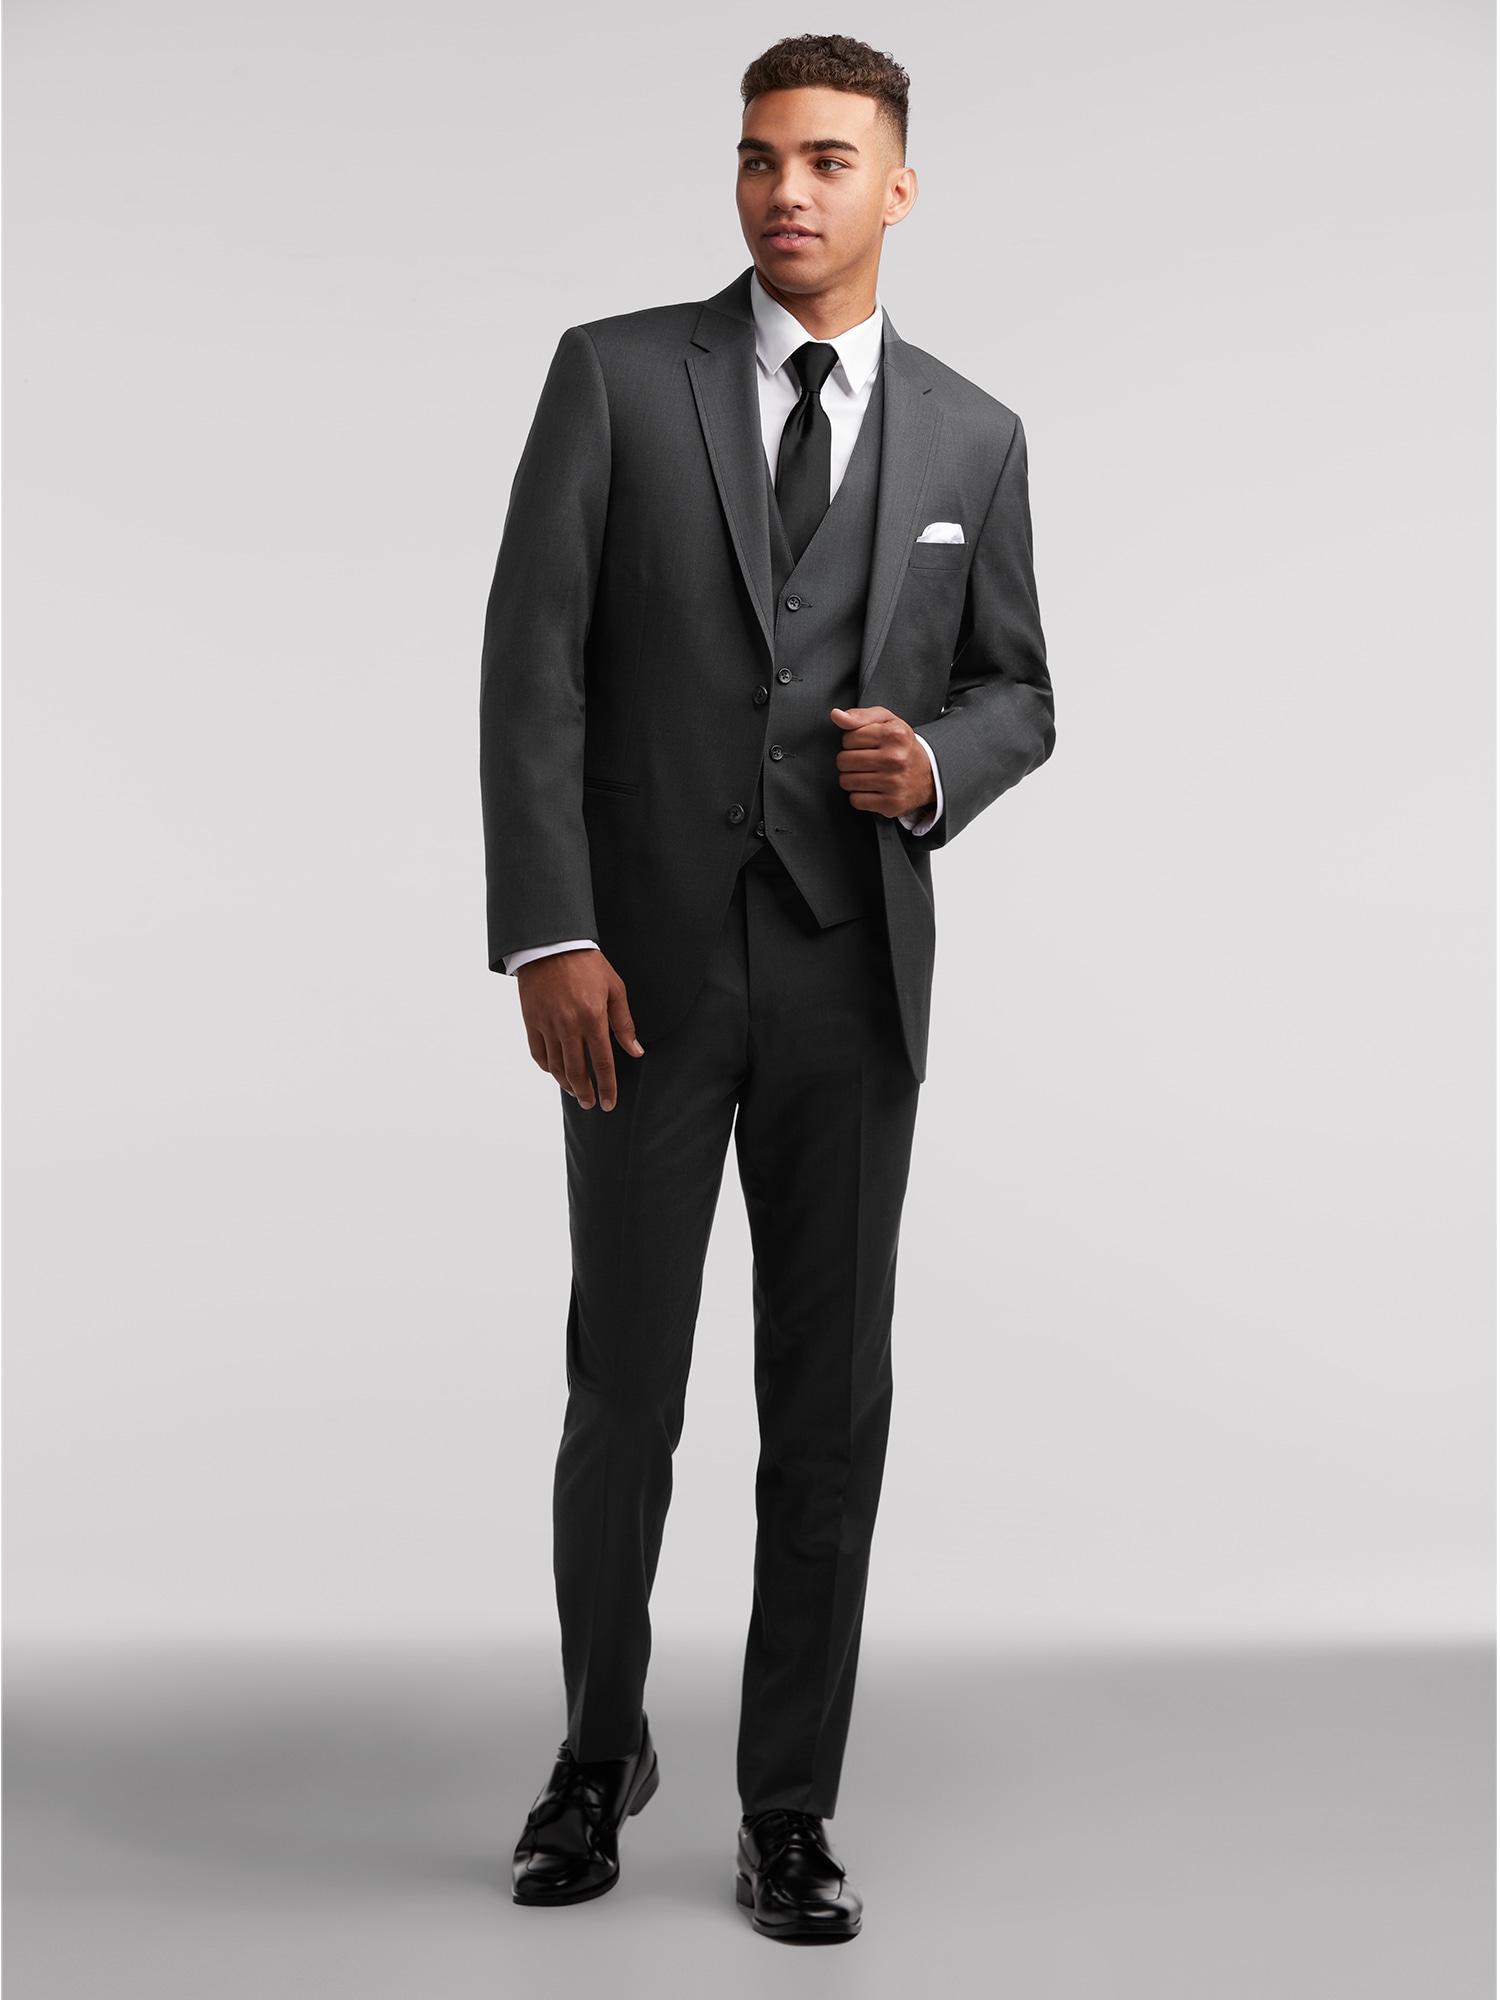 Tuxedo Styles for Special Occasions & Formal Events | Moores Clothing